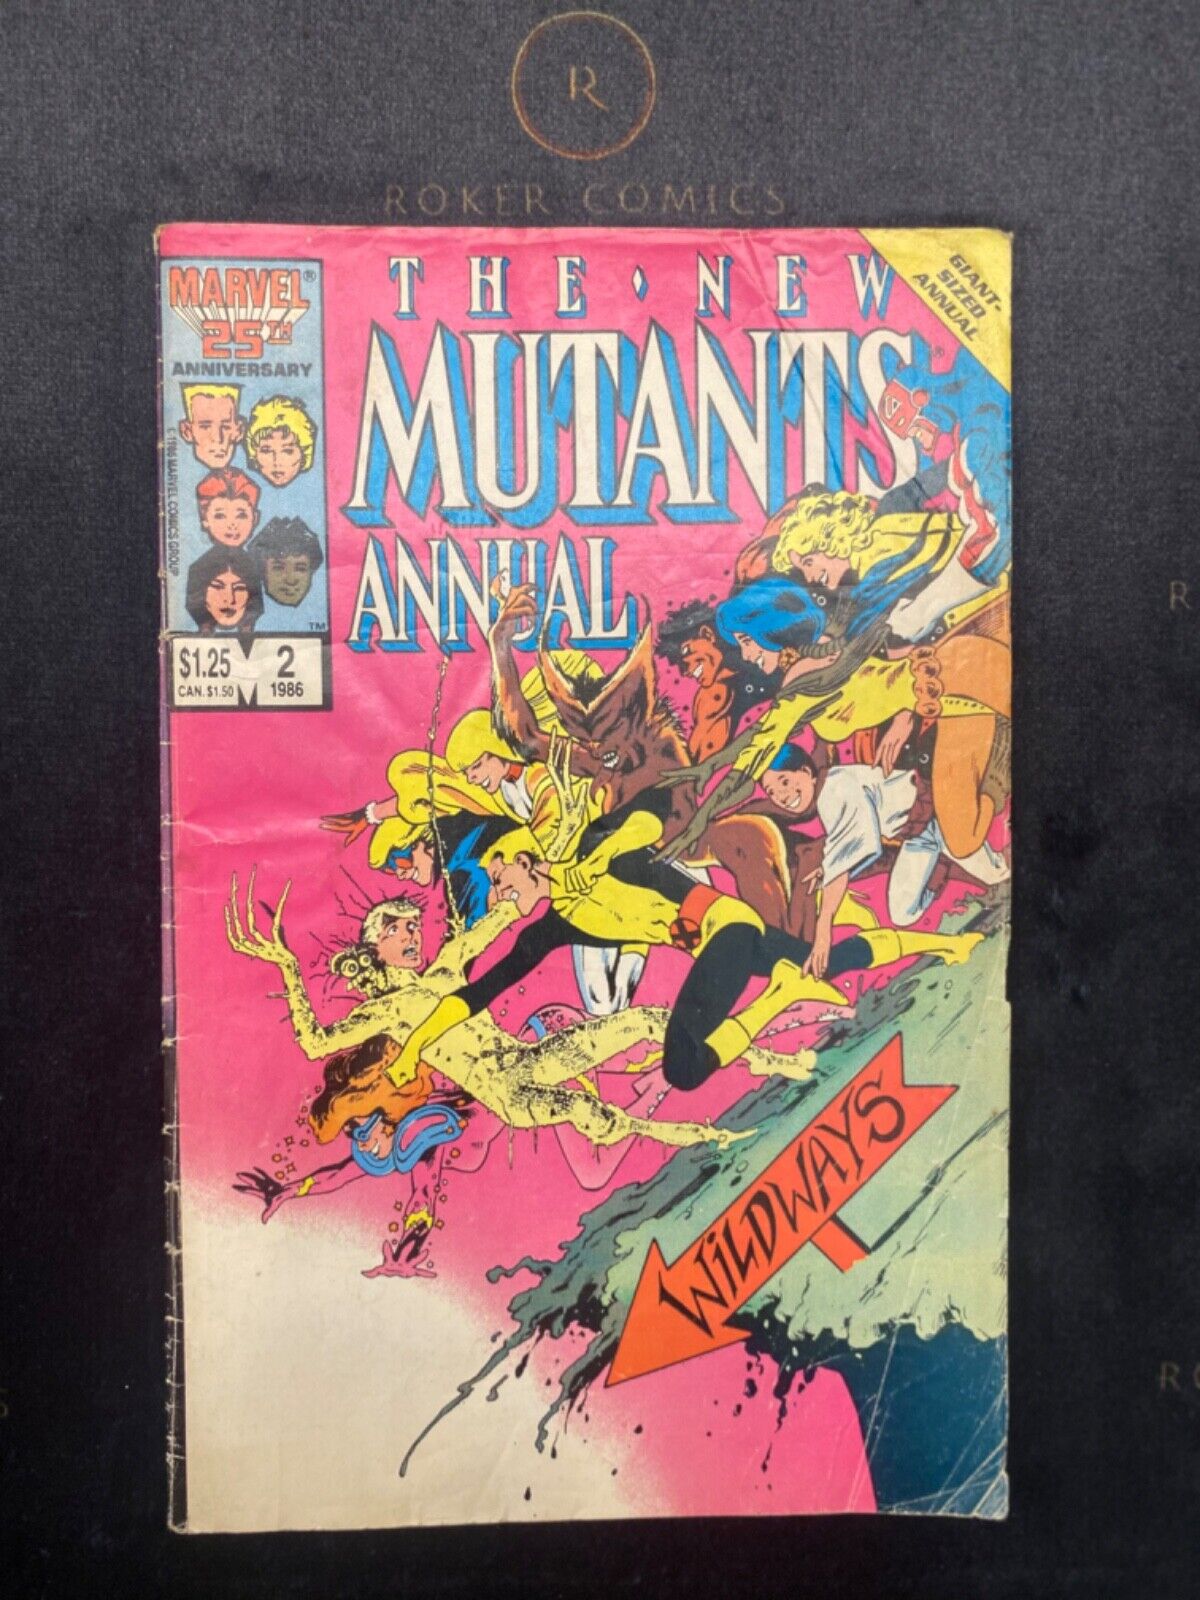 RARE 1986 New Mutants Annual #2 (KEY ISSUE) First Appearance Of Psylocke